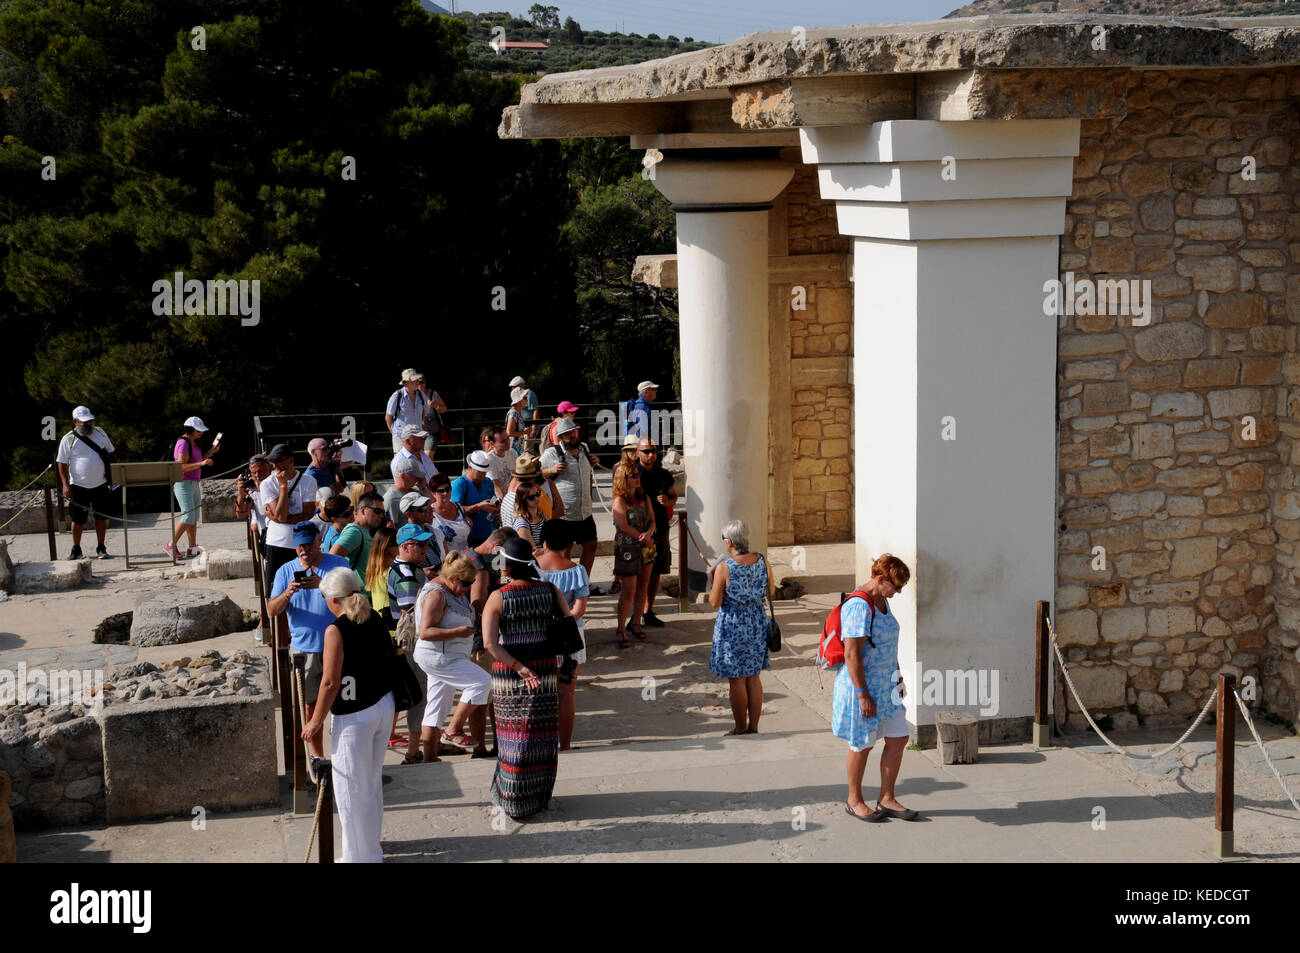 Visitors, many from tours and cruise ships, crowd into the Palace at Knossos on the Island of Crete. Interested in history or just a site to tick off? Stock Photo